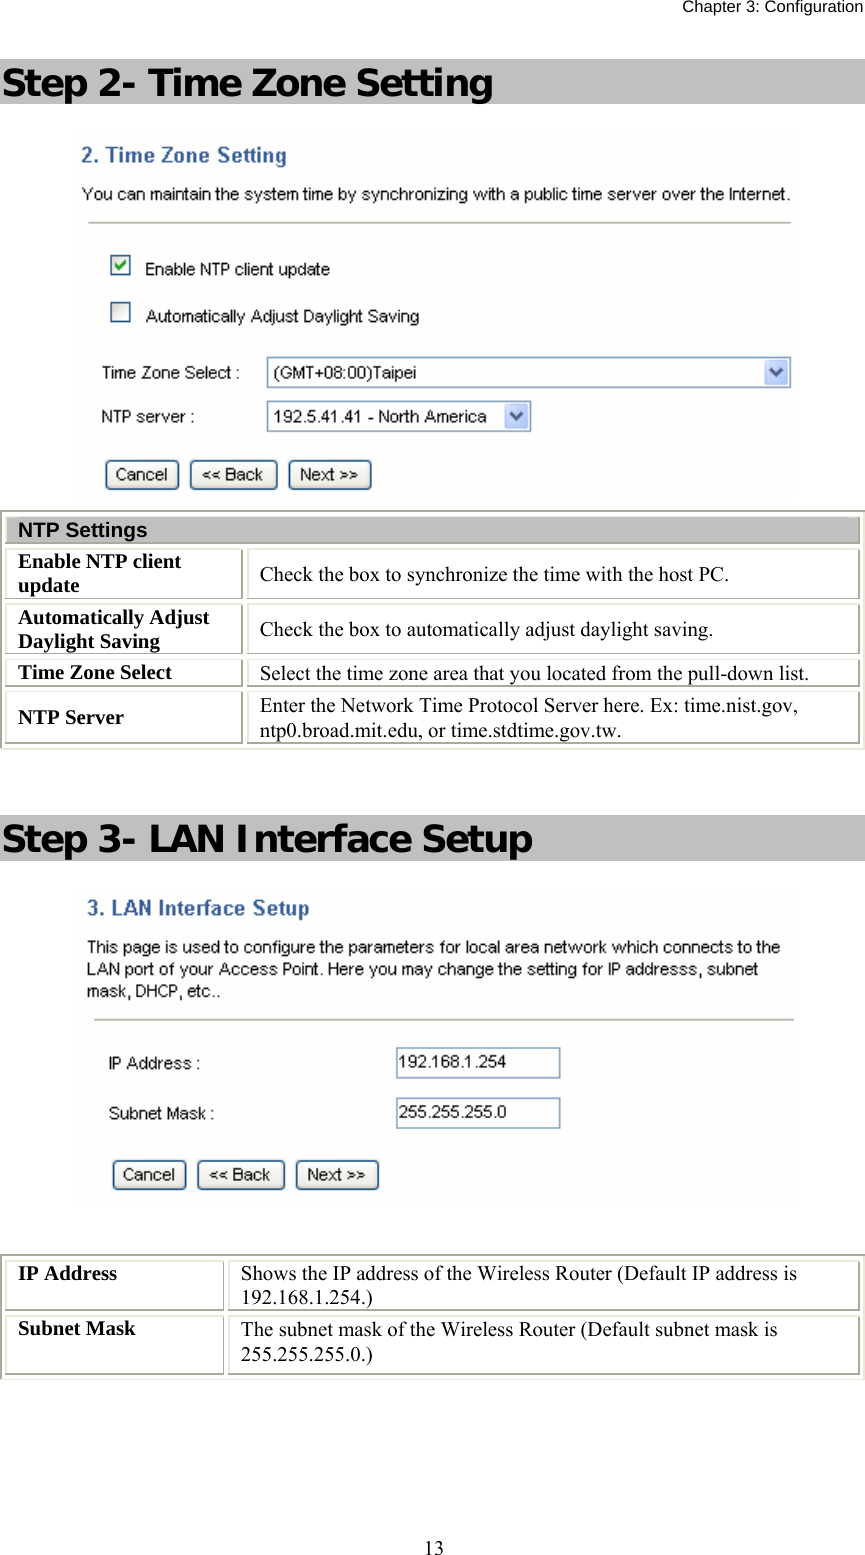   Chapter 3: Configuration  13Step 2- Time Zone Setting  NTP Settings Enable NTP client update  Check the box to synchronize the time with the host PC. Automatically Adjust Daylight Saving  Check the box to automatically adjust daylight saving. Time Zone Select  Select the time zone area that you located from the pull-down list. NTP Server  Enter the Network Time Protocol Server here. Ex: time.nist.gov, ntp0.broad.mit.edu, or time.stdtime.gov.tw.  Step 3- LAN Interface Setup   IP Address  Shows the IP address of the Wireless Router (Default IP address is 192.168.1.254.) Subnet Mask  The subnet mask of the Wireless Router (Default subnet mask is 255.255.255.0.)    